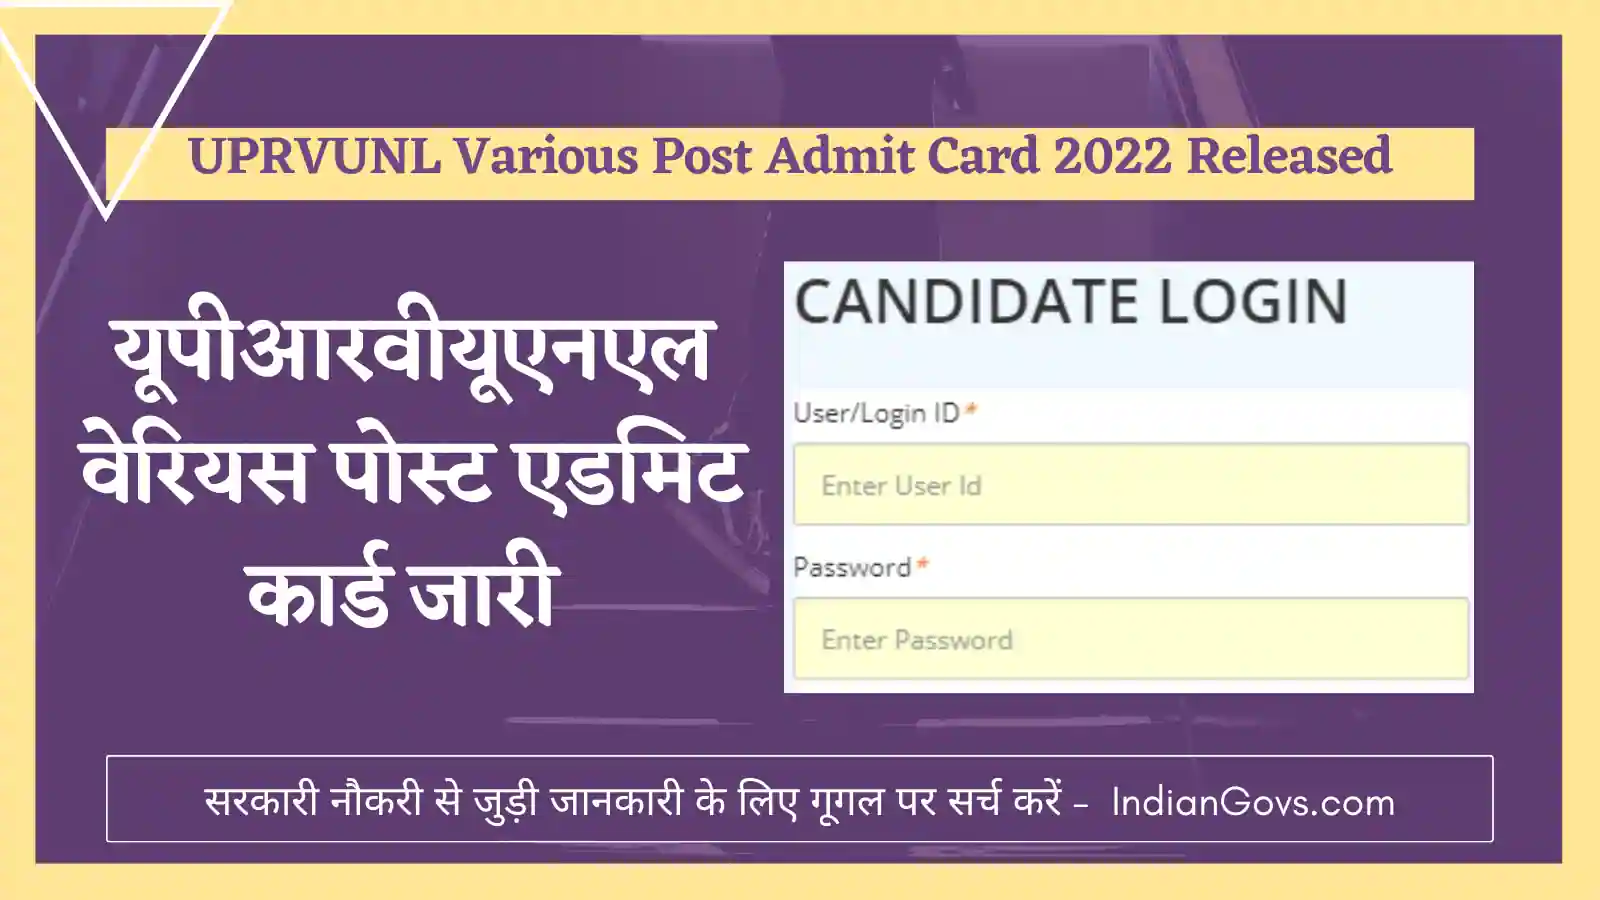 UPRVUNL Various Post Admit Card 2022 Released